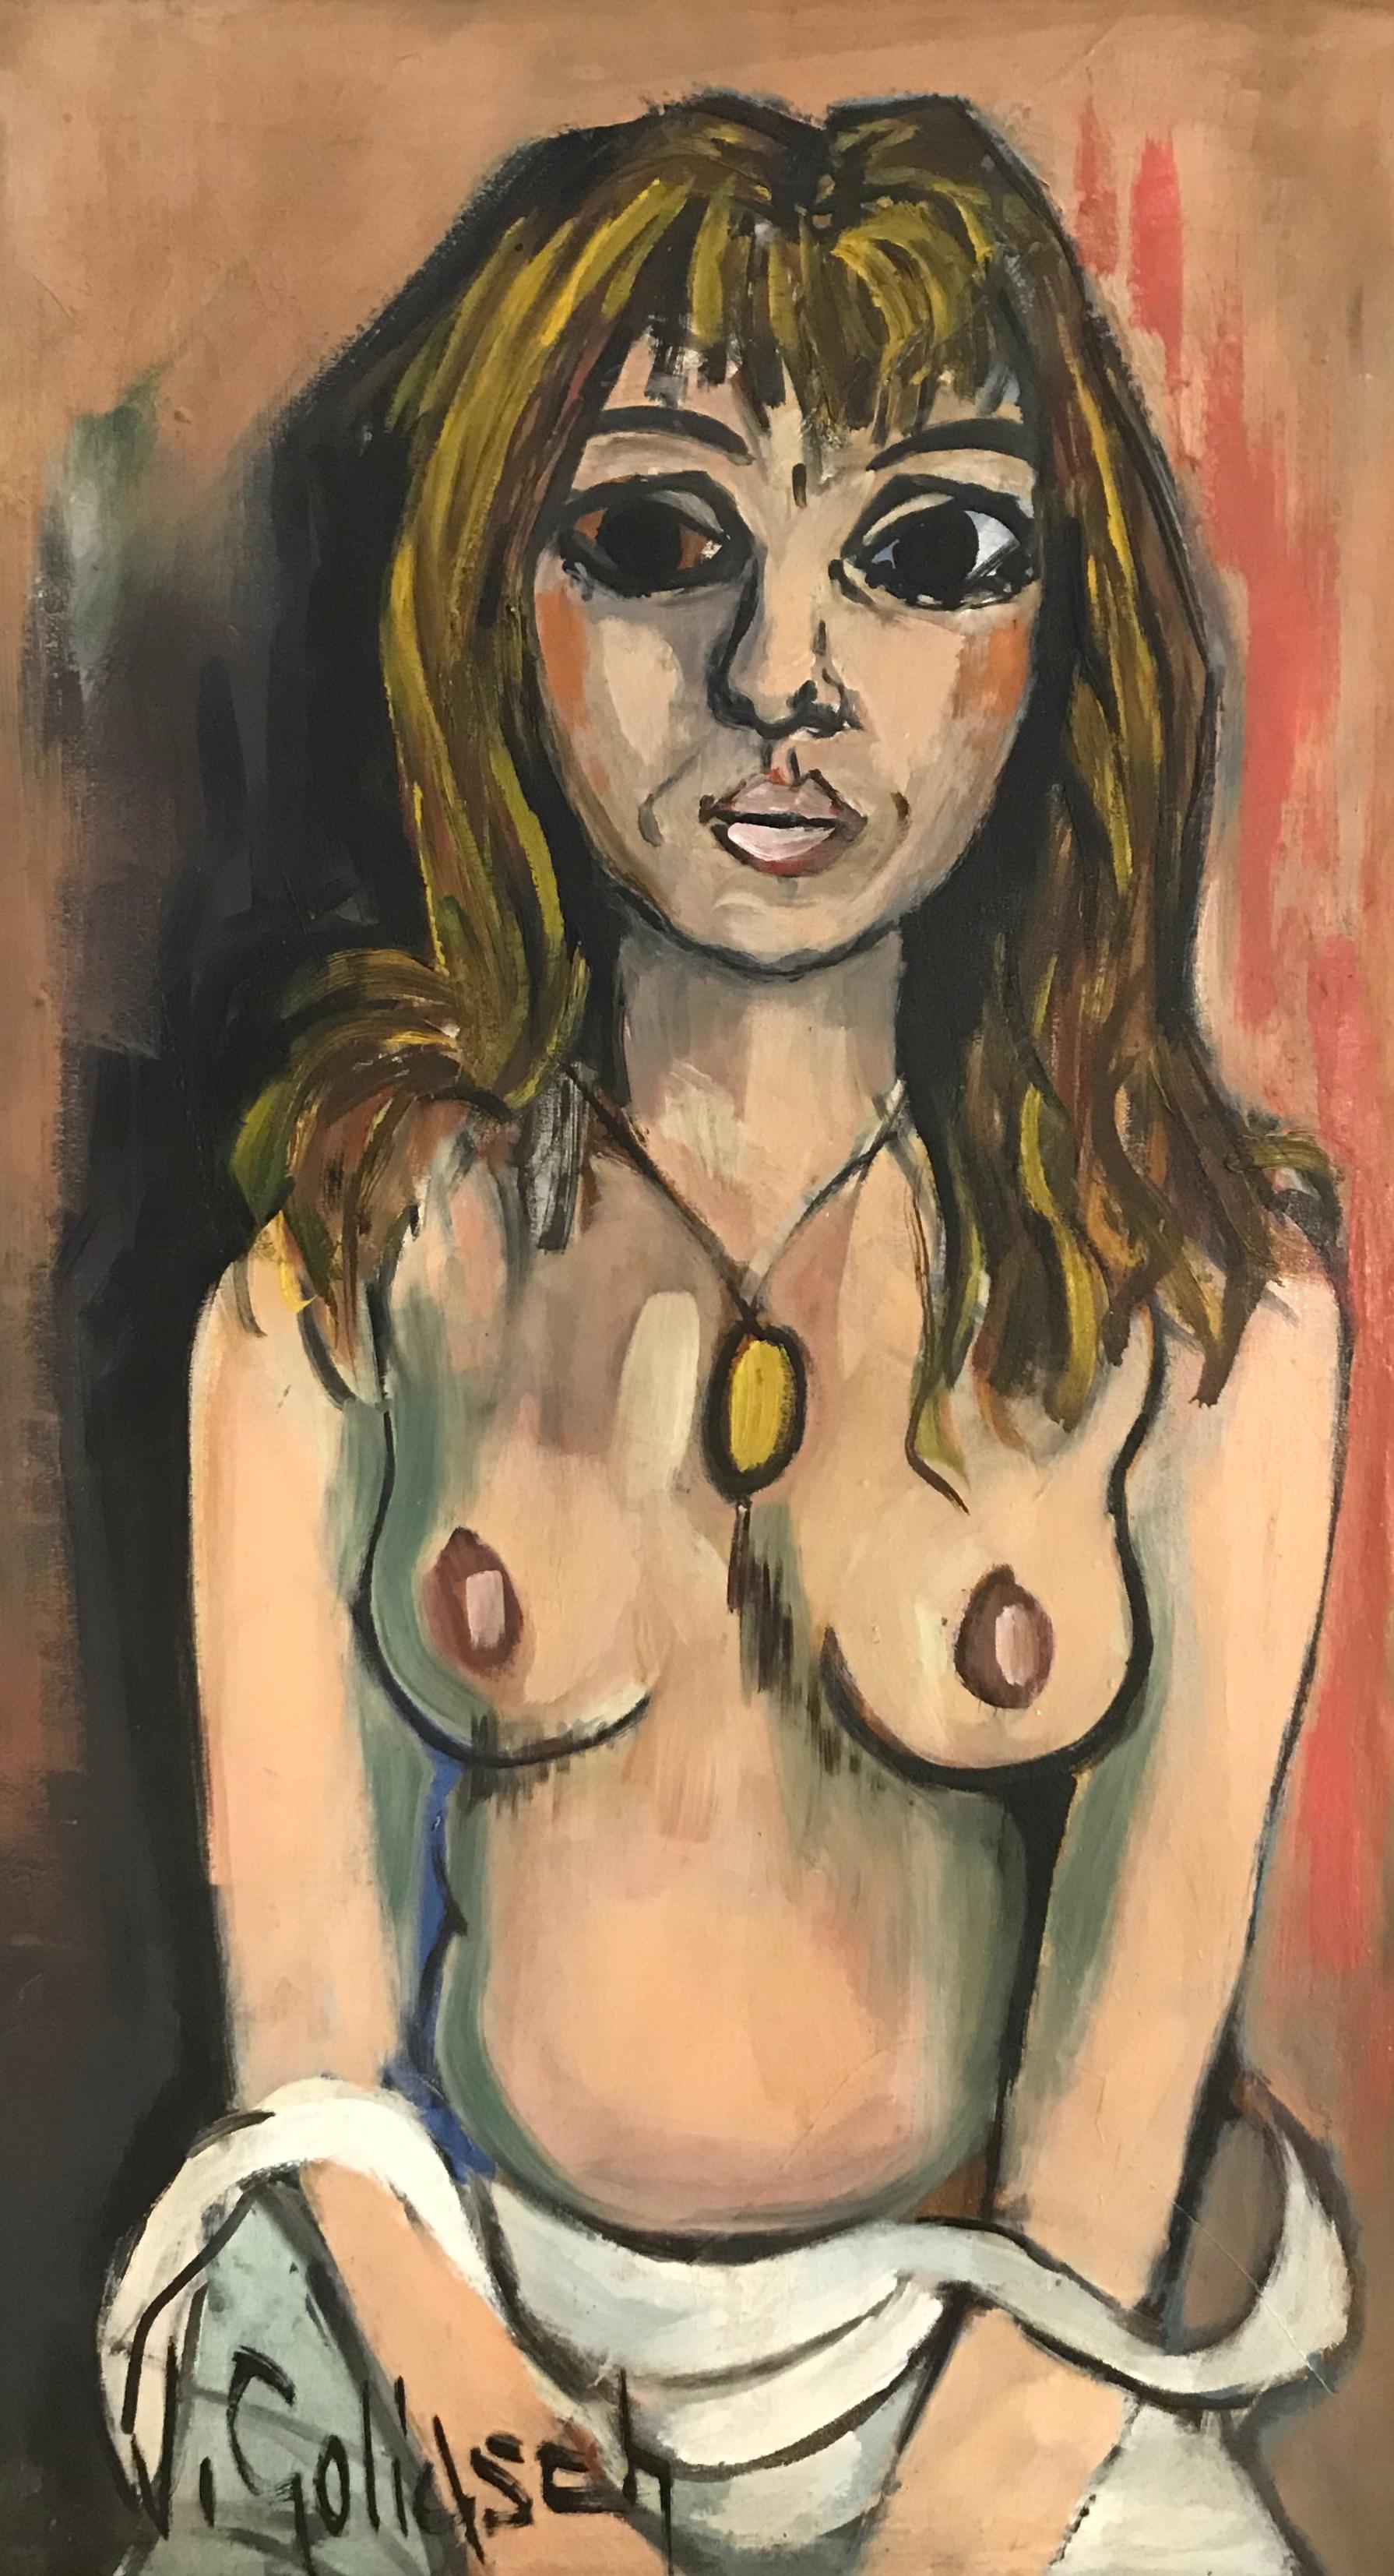 William Goliasch Nude Painting - Nude with a yellow medallion by William GOLIASCH - Oil on canvas 46x81 cm